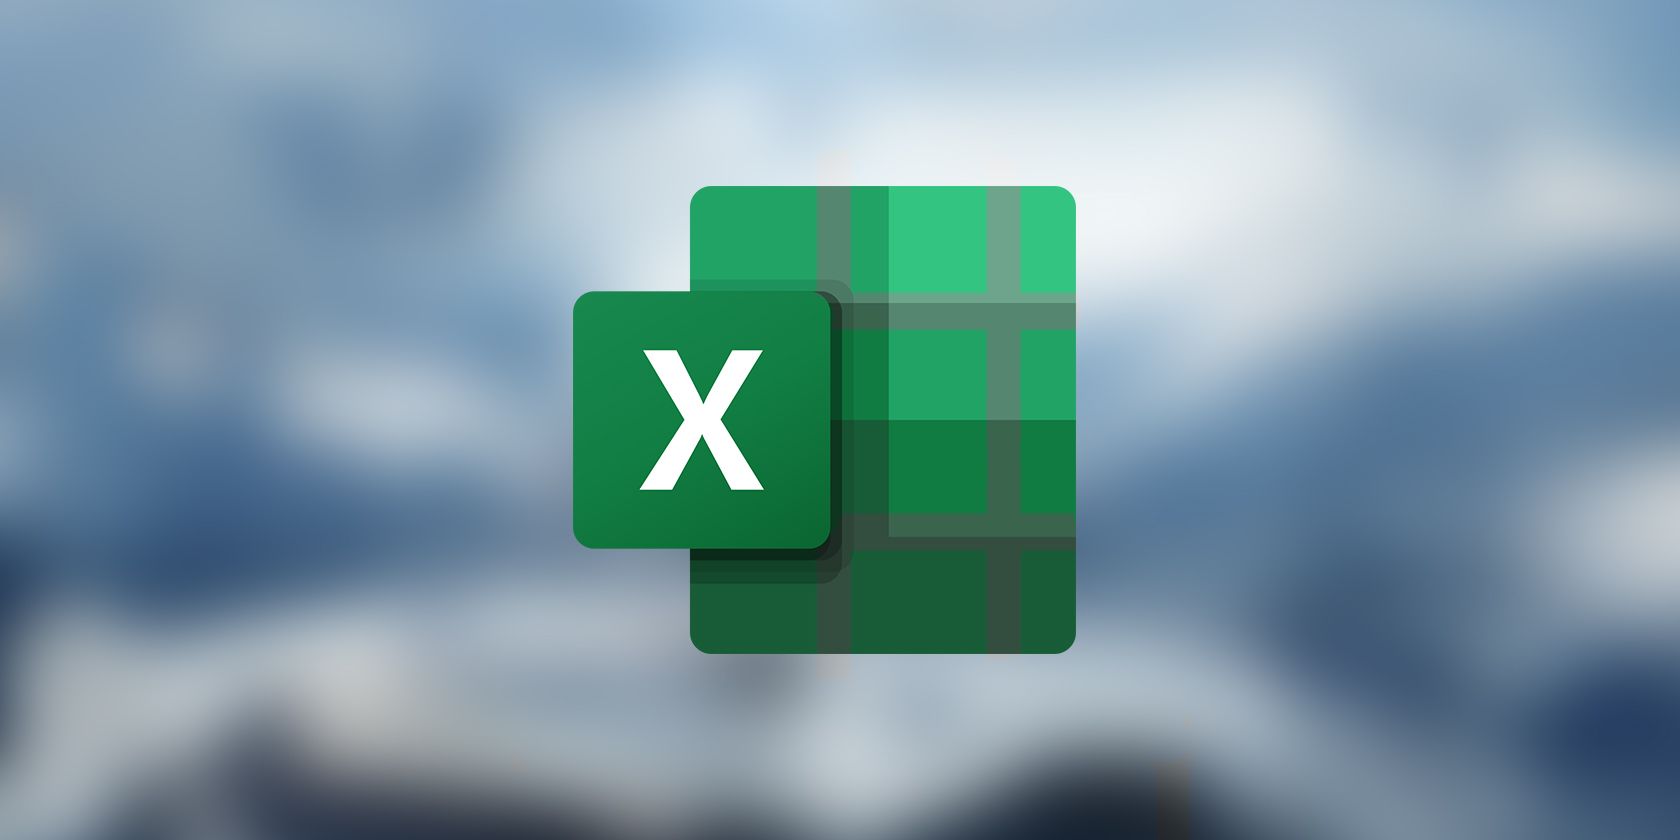 Excel logo with a grid background